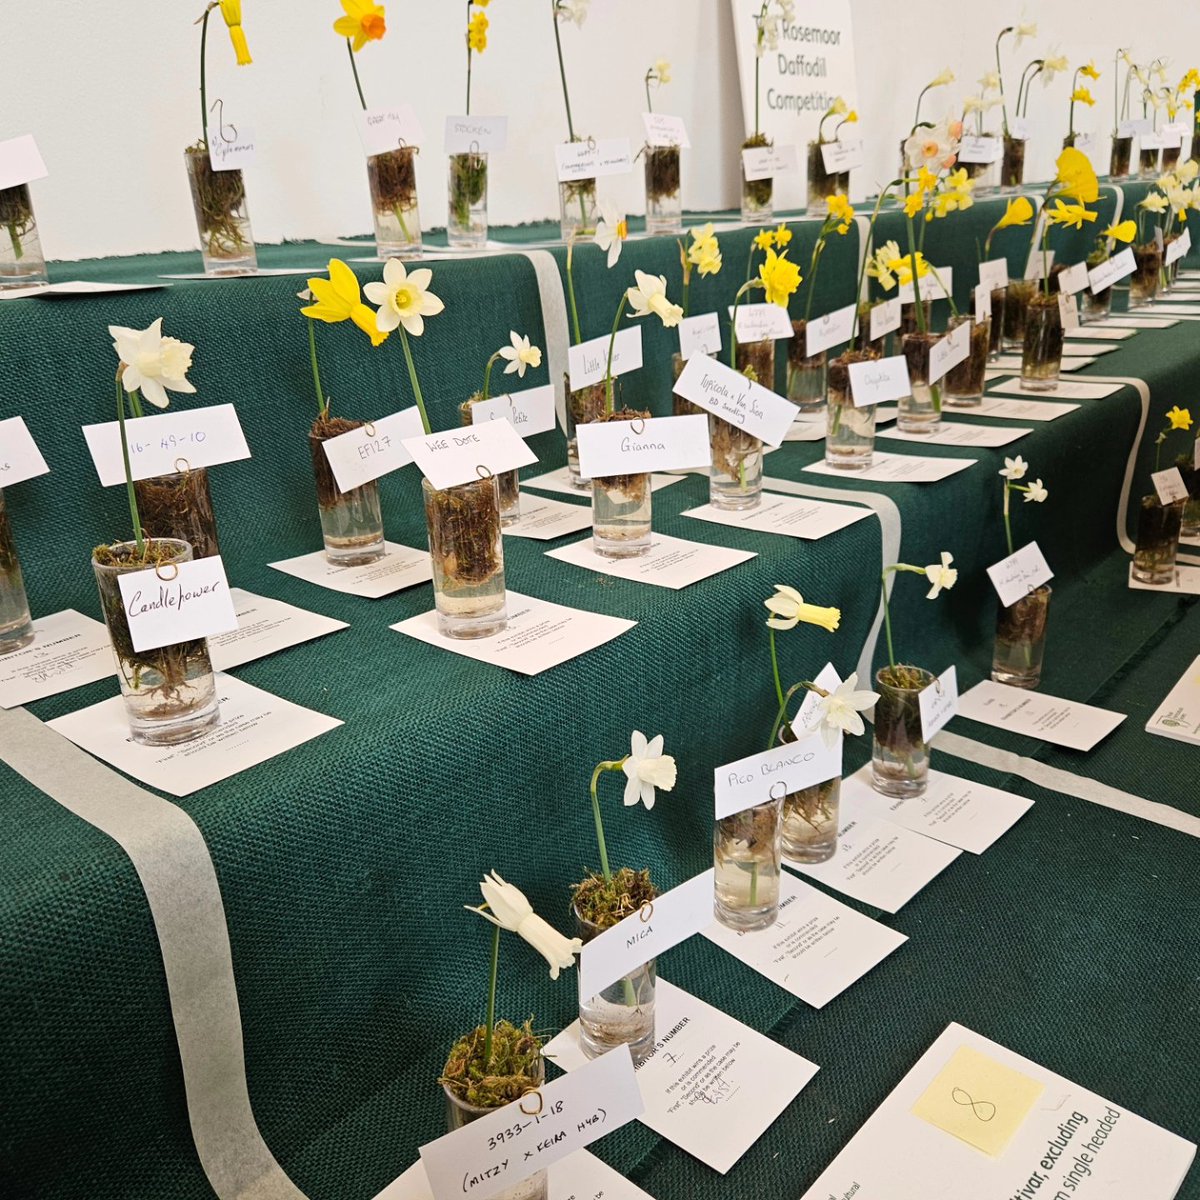 Teeny tiny Narcissus in the @The_RHS Daffodil Show @RHS_Rosemoor today